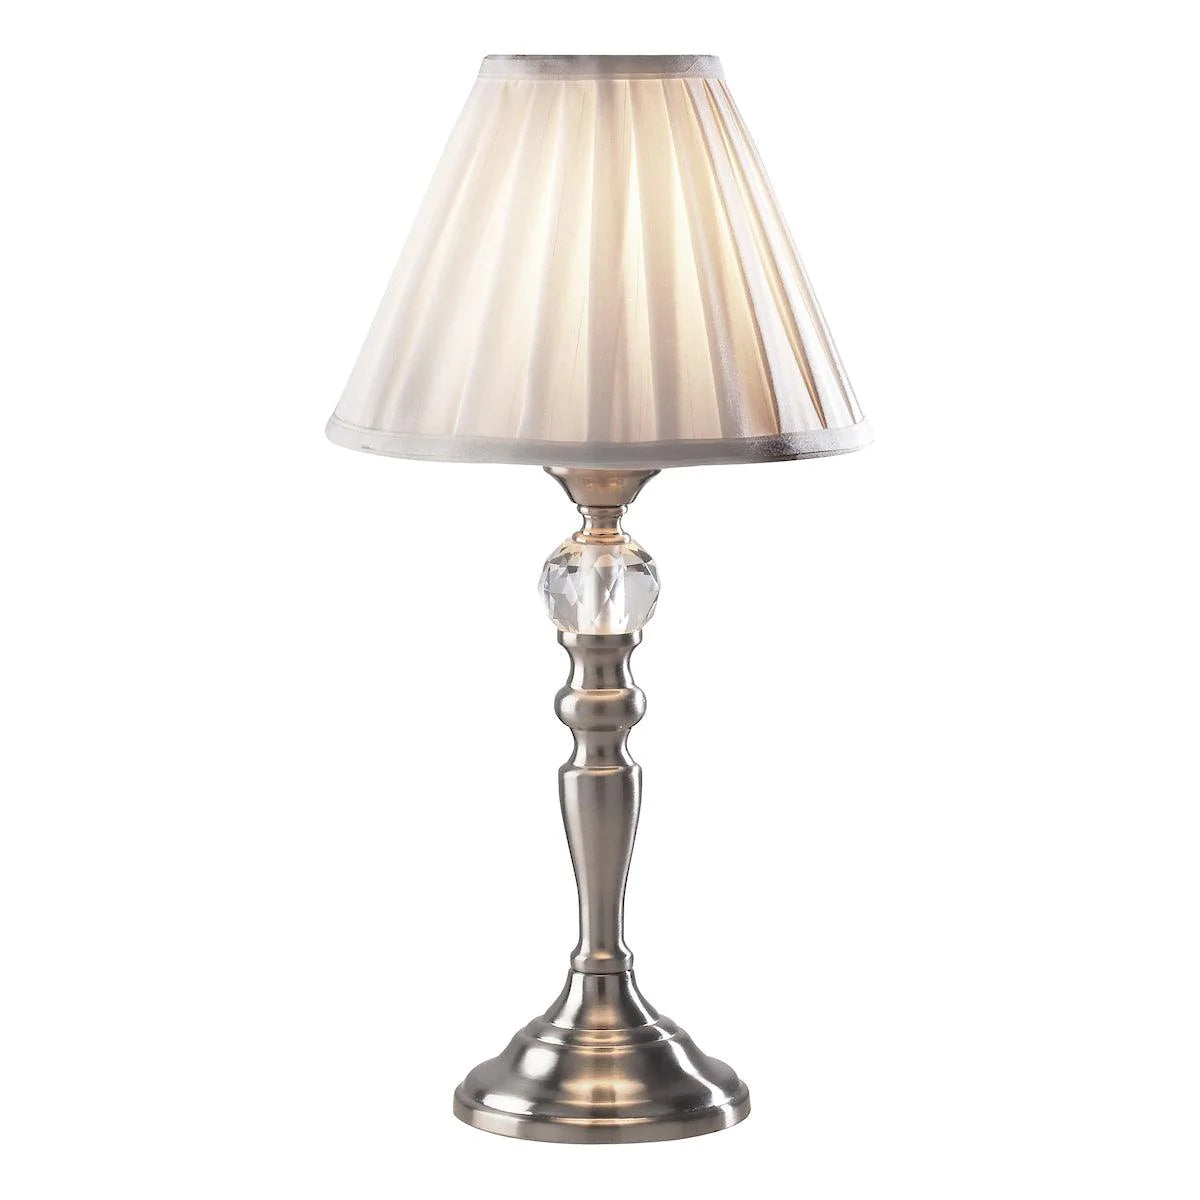 Beau Touch Table Lamp Satin Chrome With Shade BEA4046 - Peter Murphy Lighting & Electrical Ltd